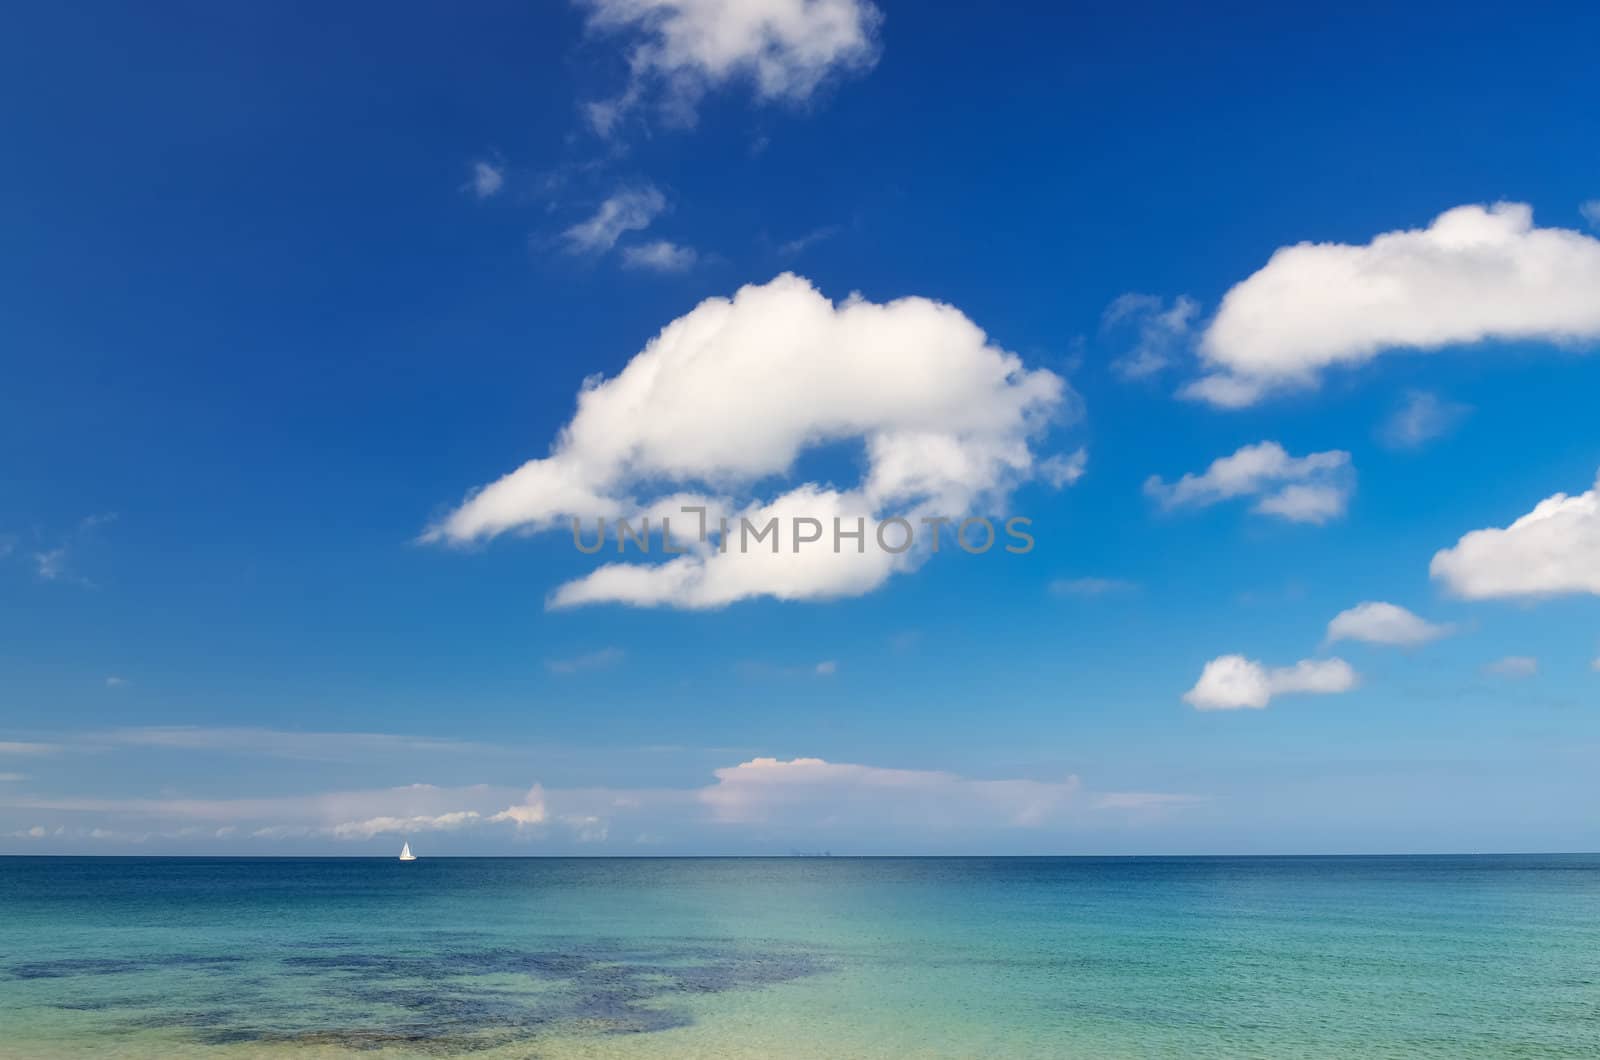 Ocean landscape with blue cloudy sky and little sailboat by martinm303